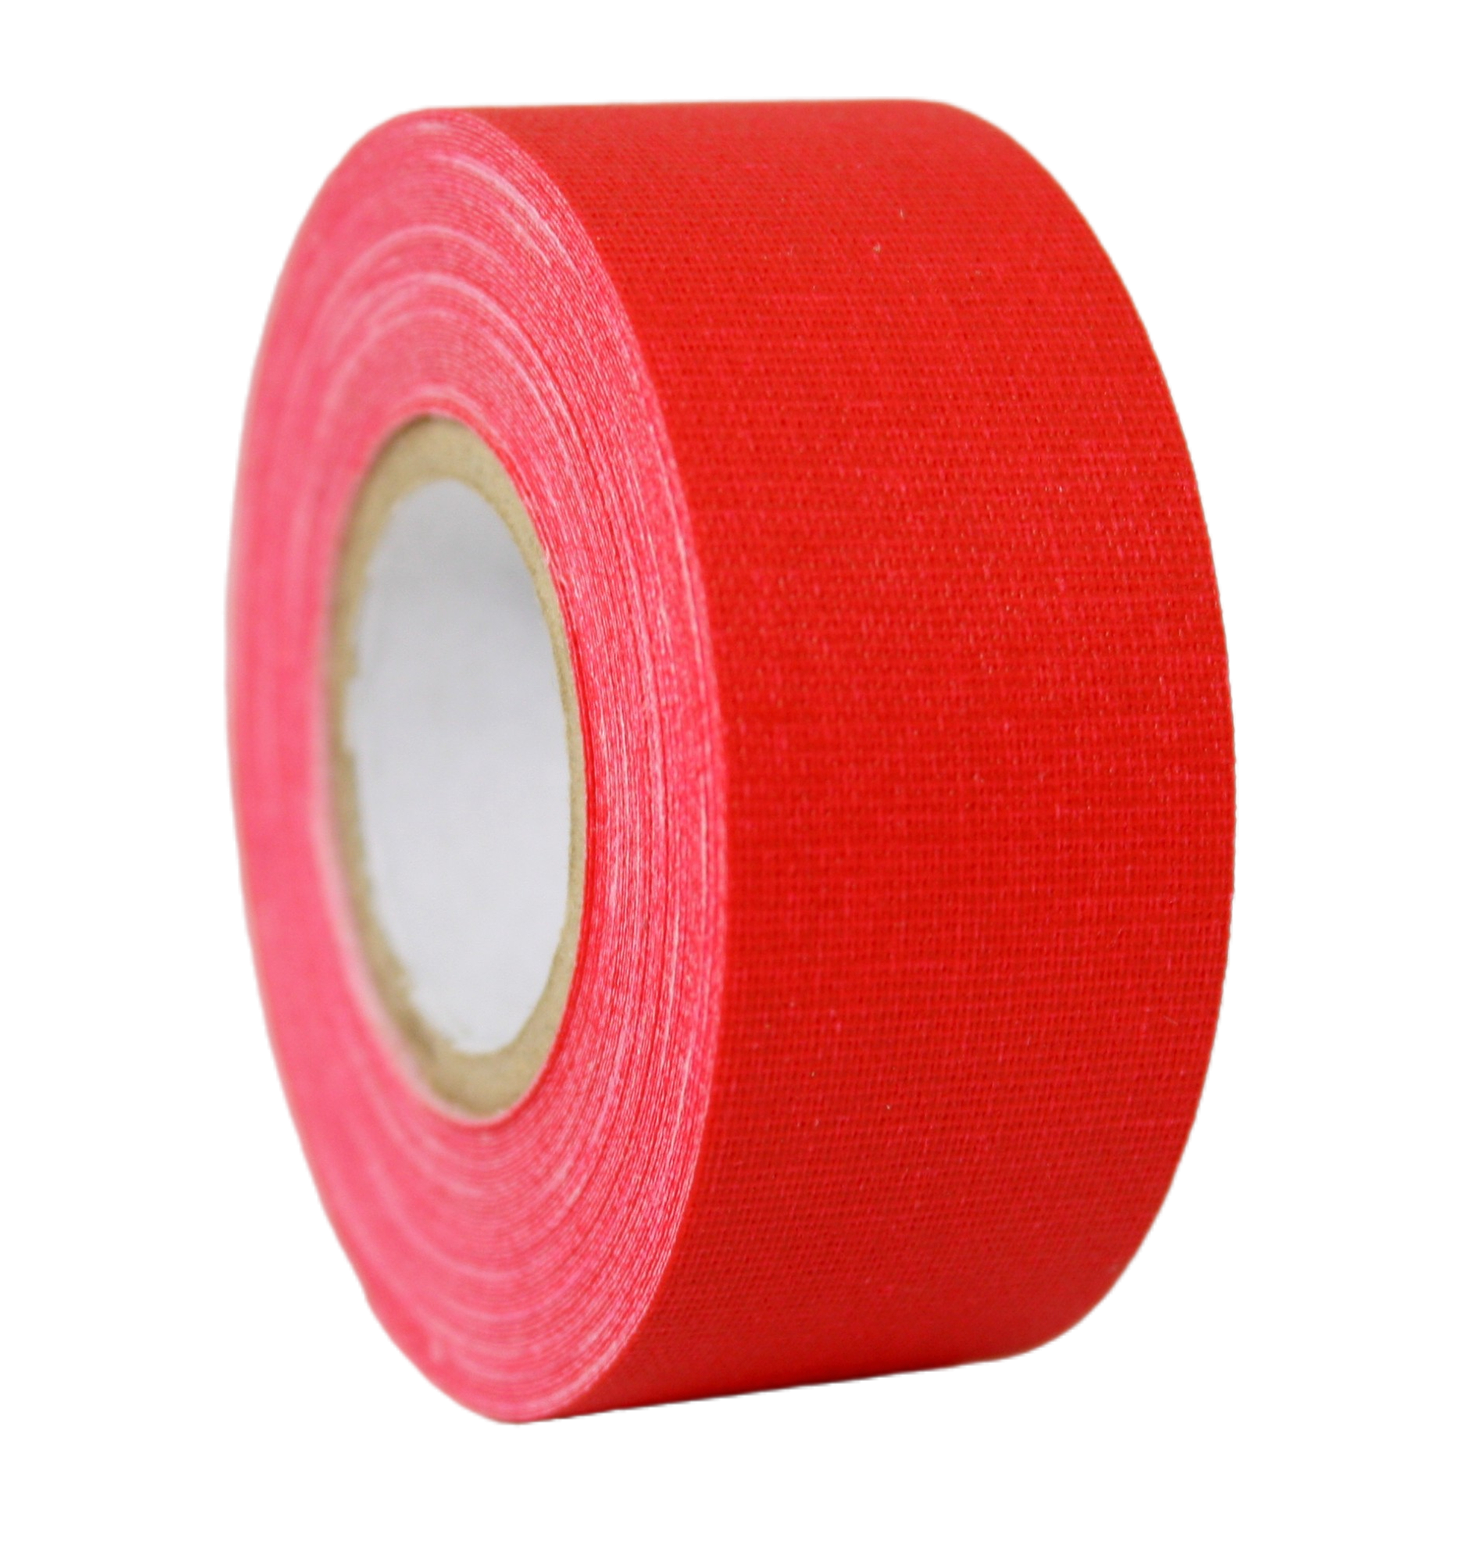 A close up of a single roll of red Micro Gaffer 1" tape.